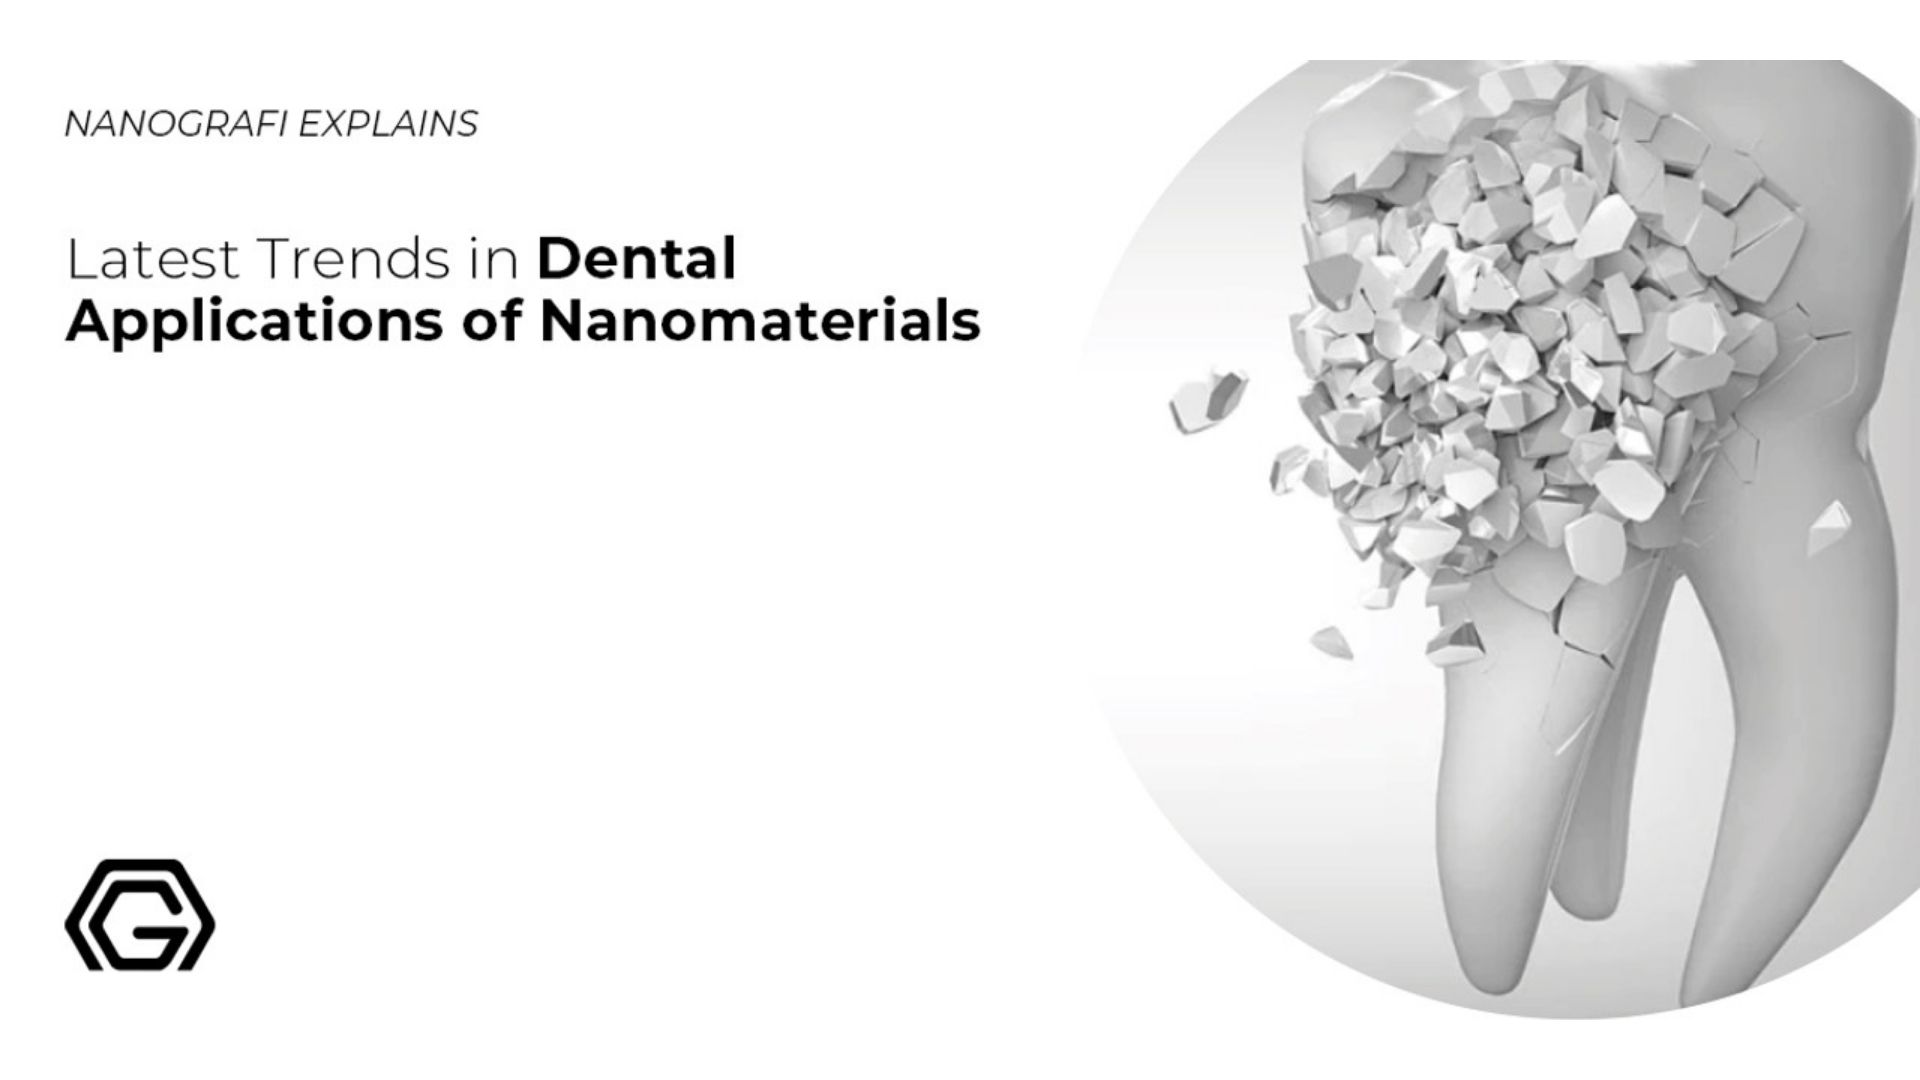 Latest trends in dental applications of nanomaterials